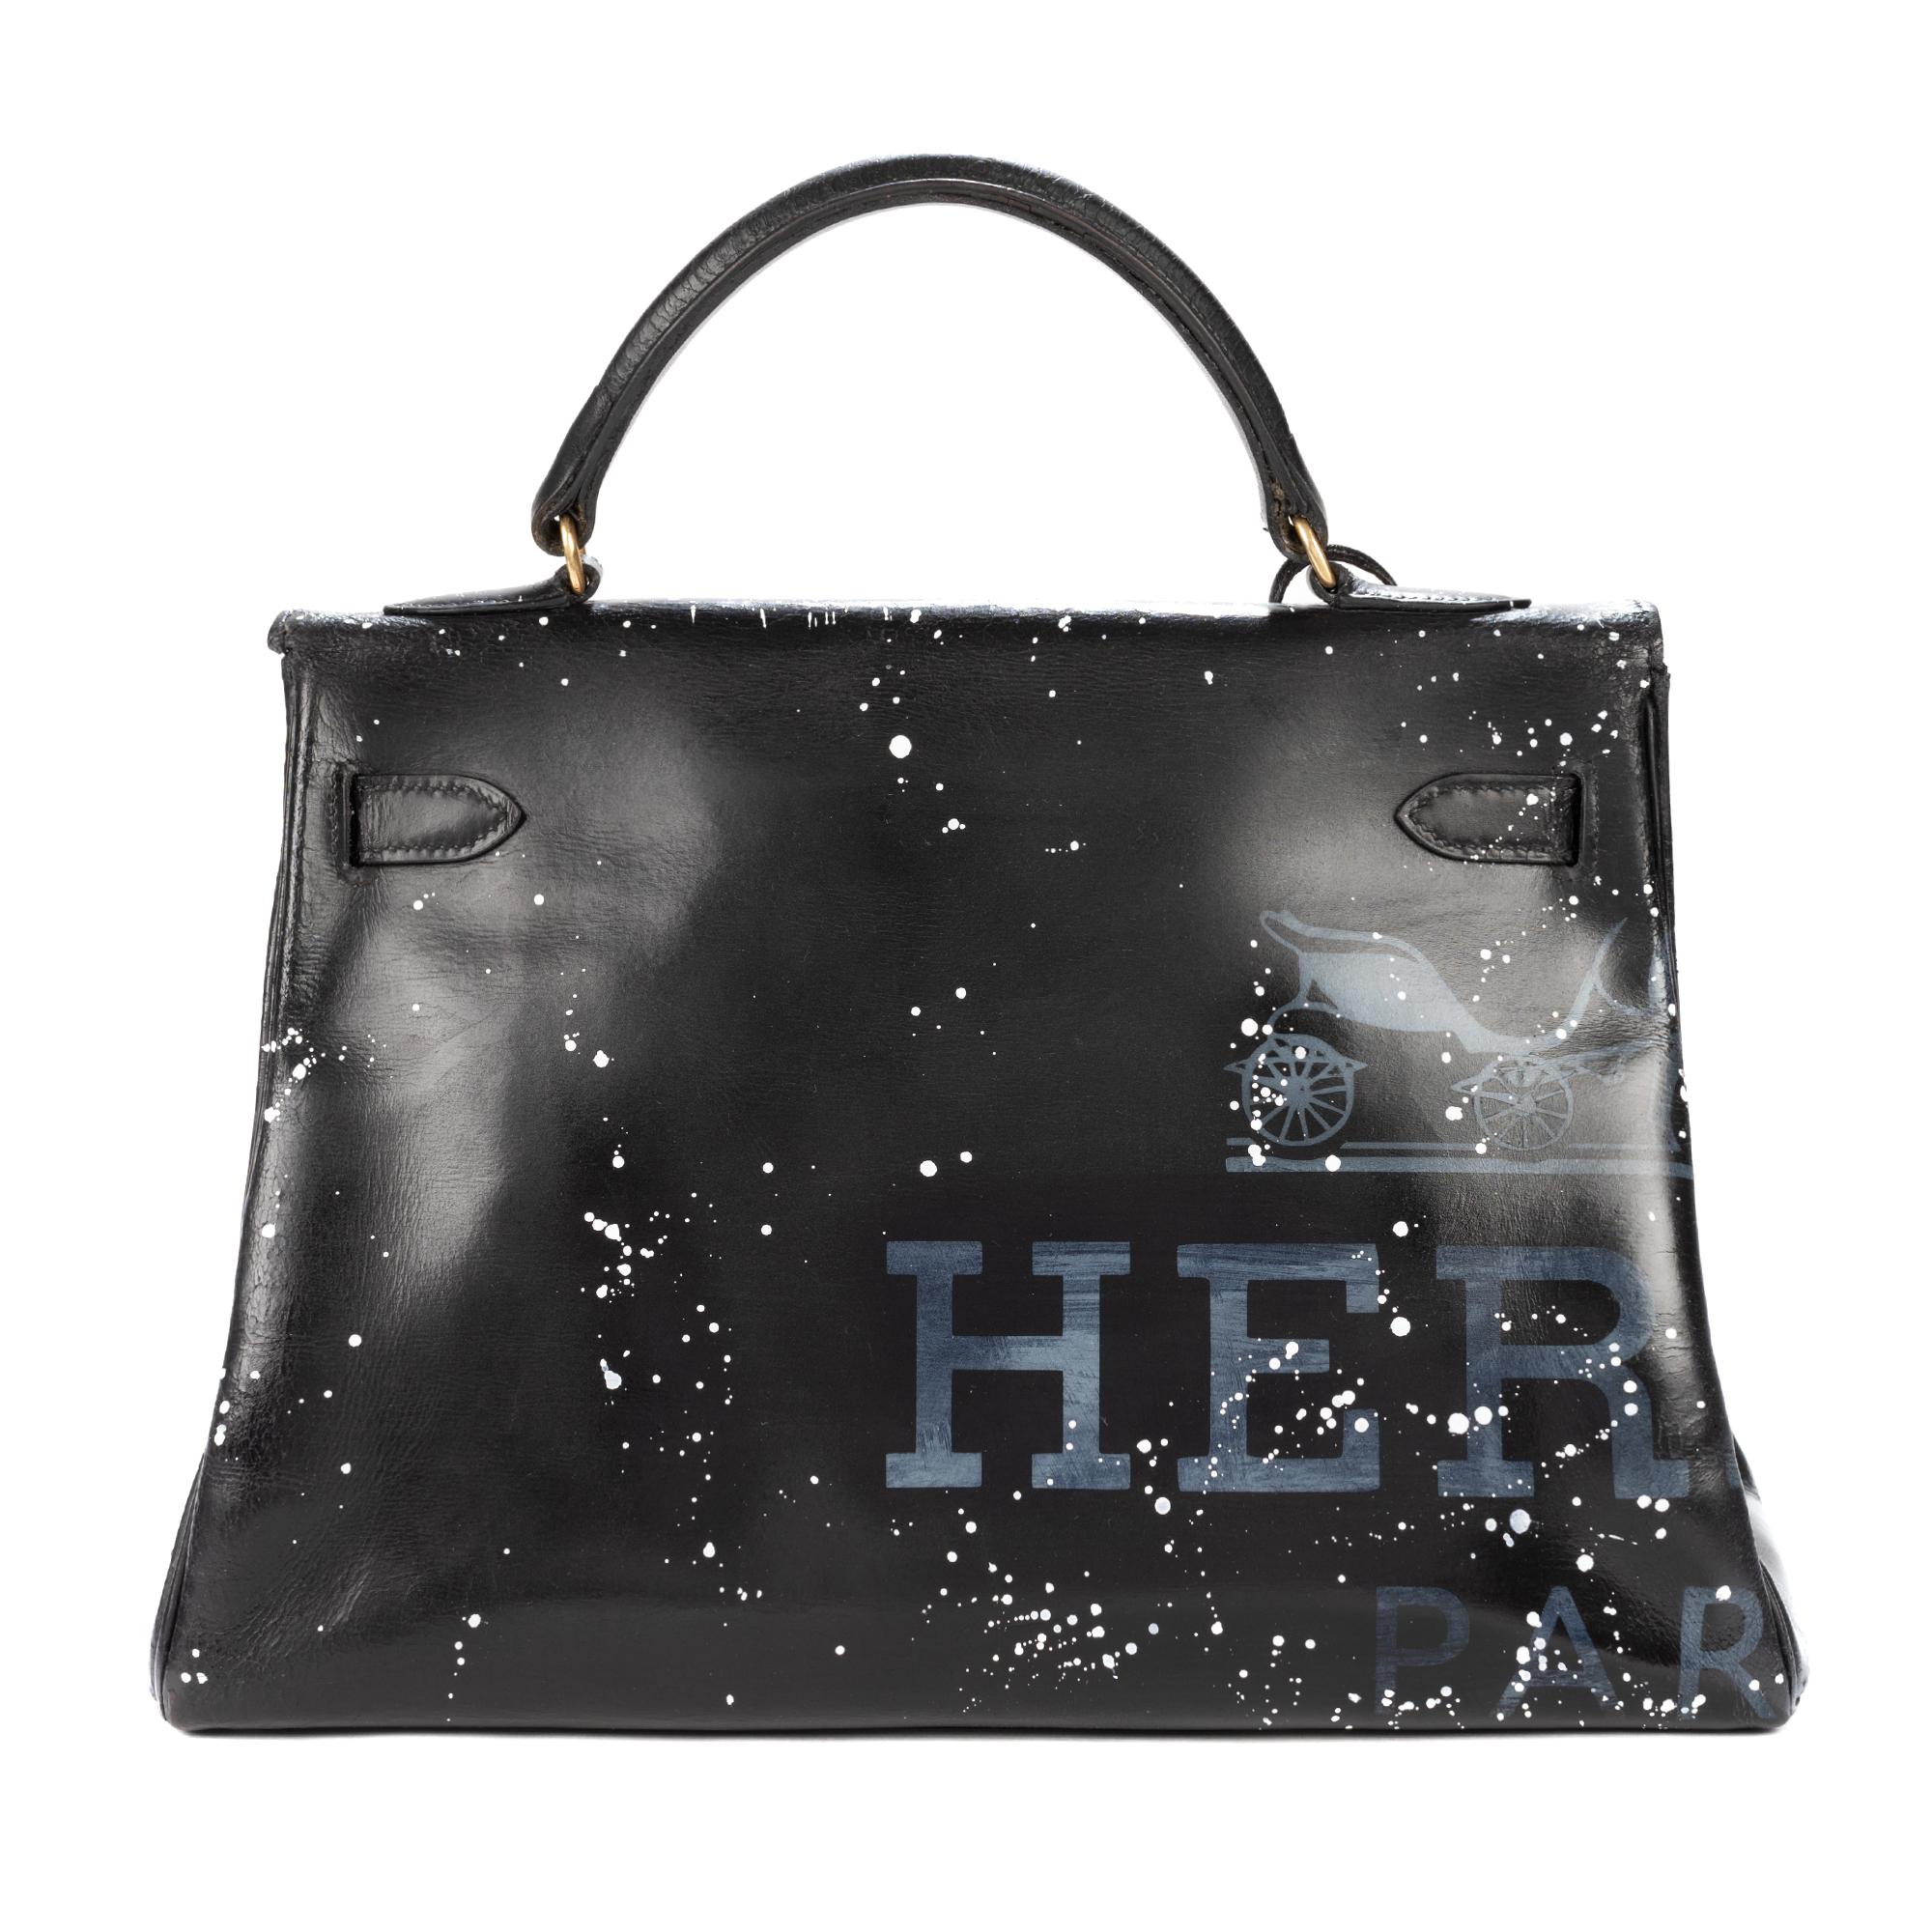 Stunning Artwork creation on Kelly Bag 32 black calf leather customized by the artist Patbo representing a beautiful image of one of the greatest Hollywood actresses of the 1950s and 1960s; Audrey Hepburn.
Bag description: Hermes Kelly 32 retourné